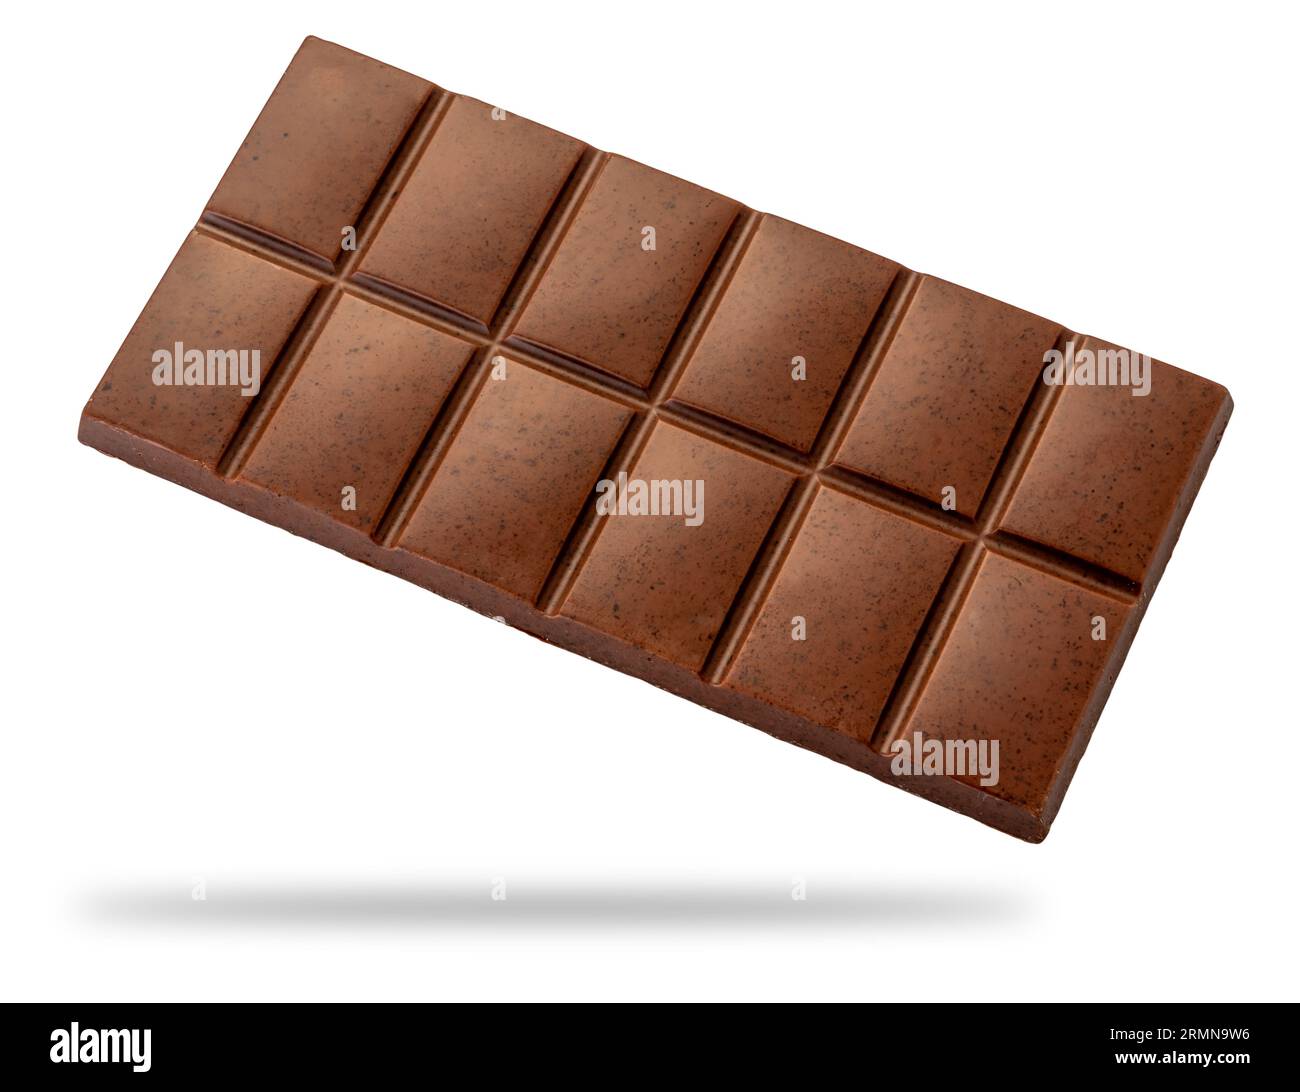 Milk chocolate bar with malt, isolated on white with clipping path included Stock Photo